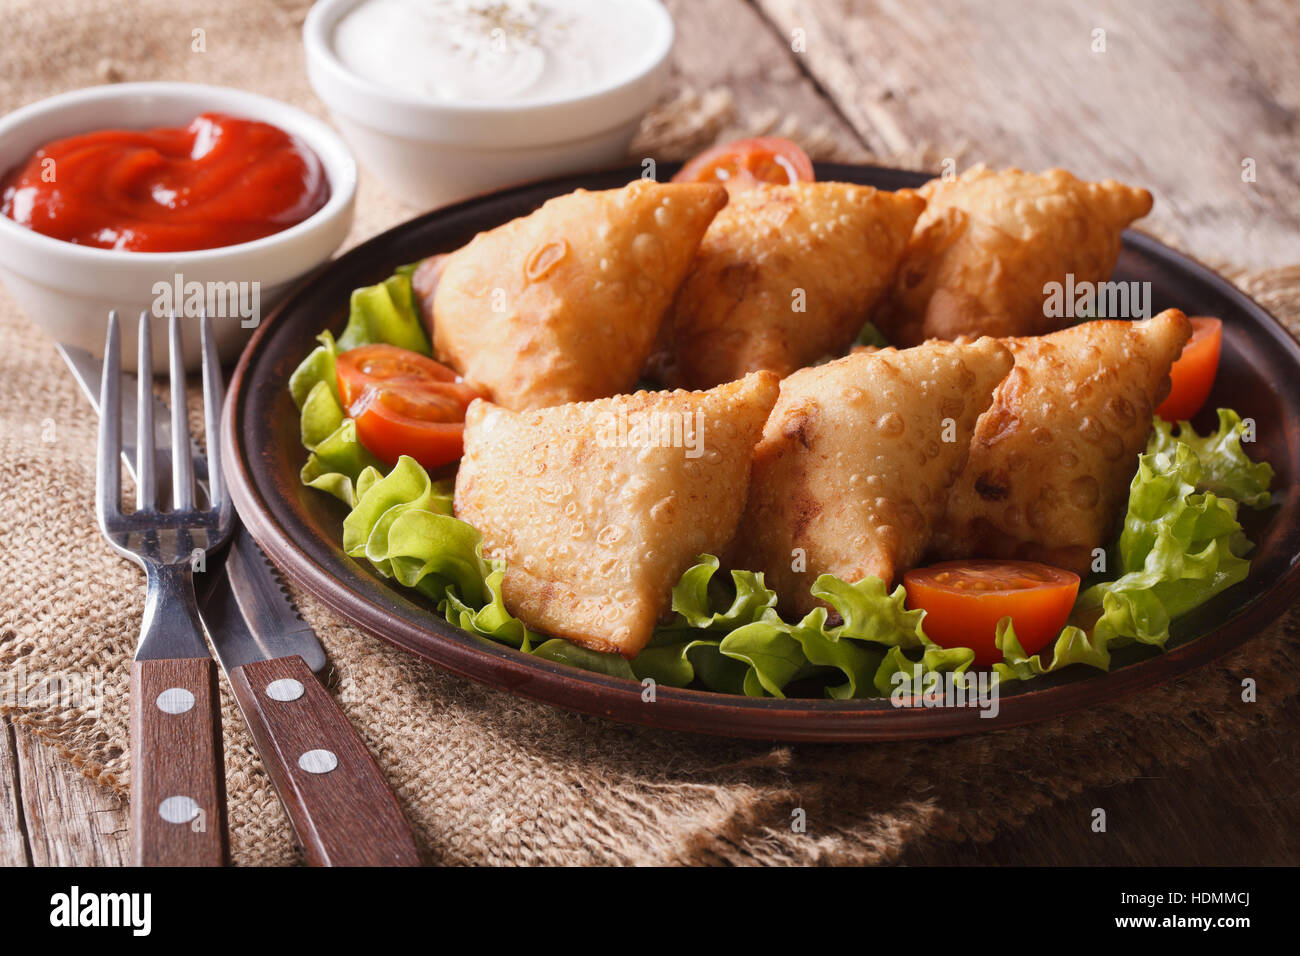 Indian samosa delicious pastry on a plate with tomatoes and lettuce on a wooden table. horizontal Stock Photo